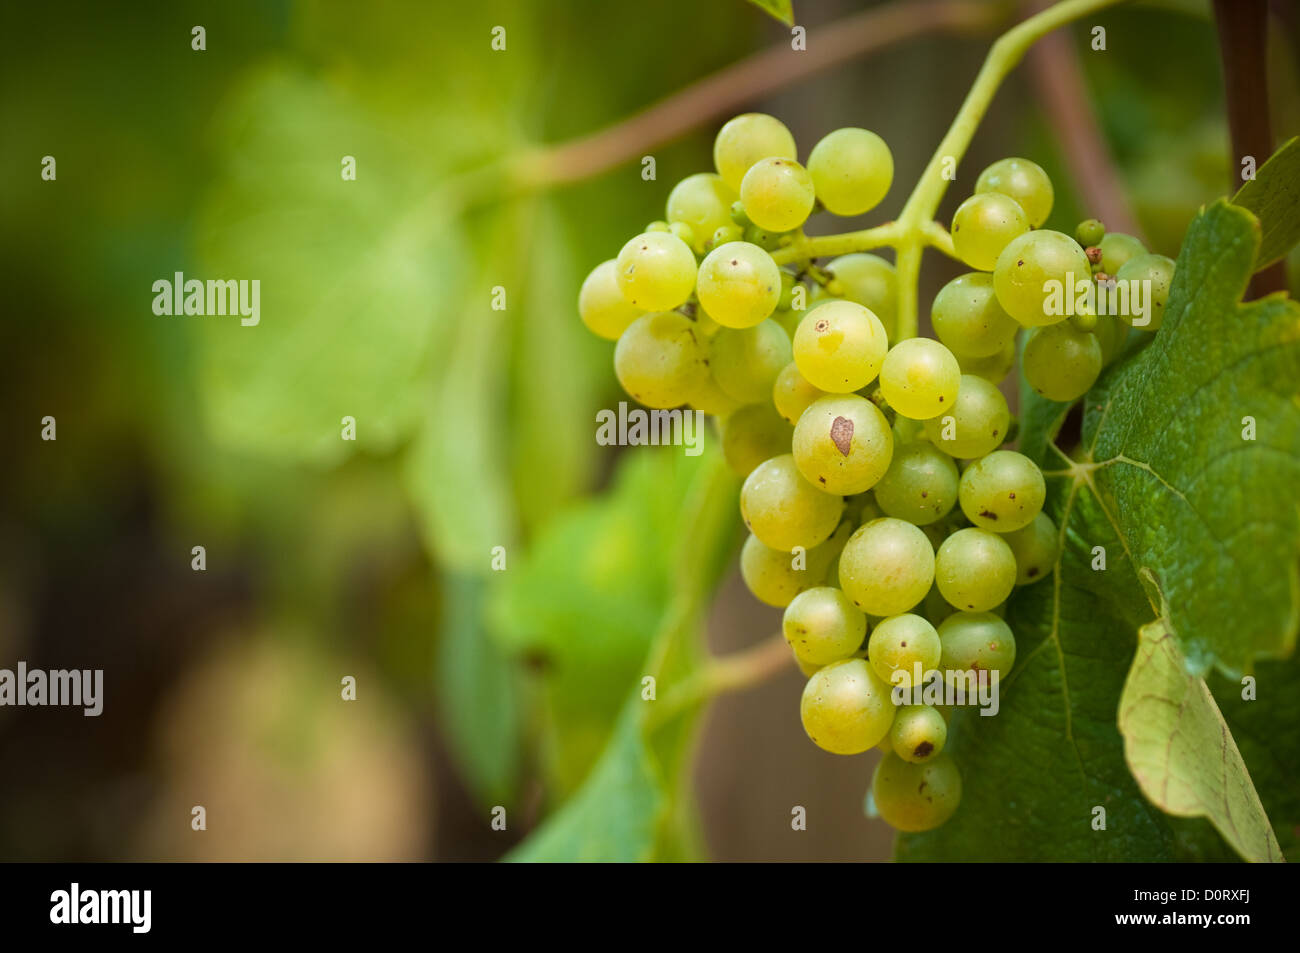 detail of grapevine withe room for text and blur effect, white raisins and leaves Stock Photo